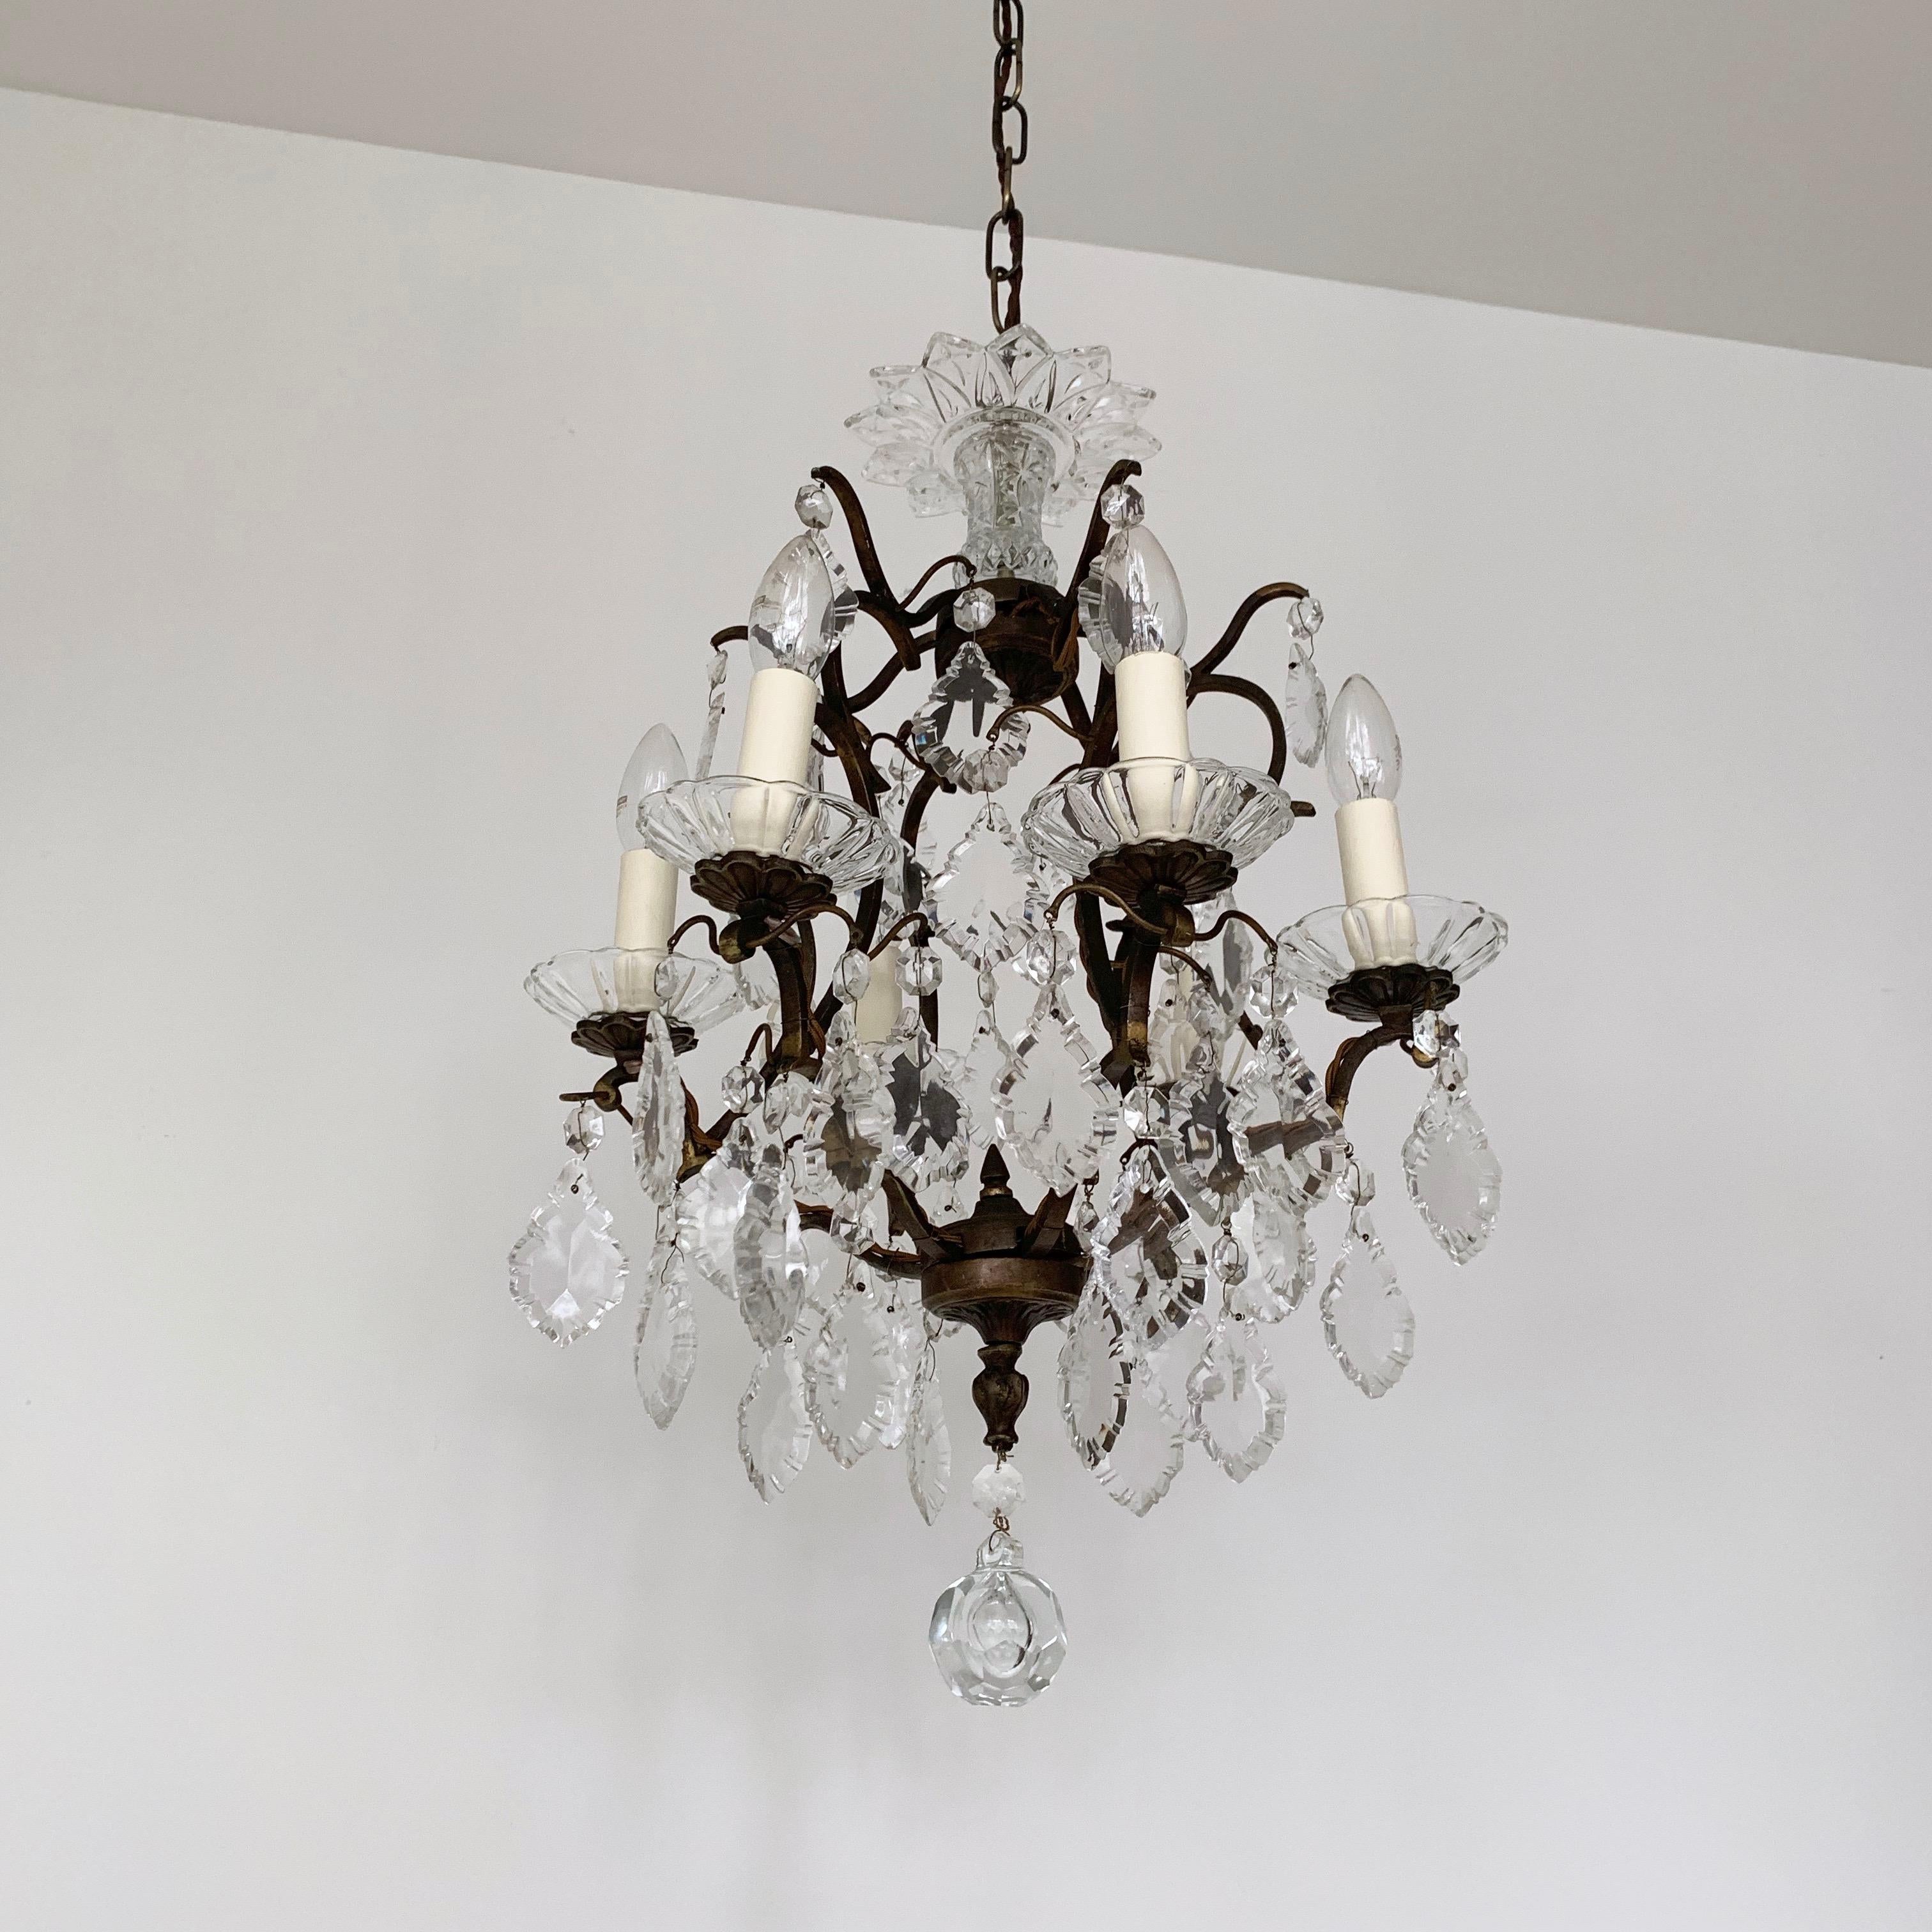 Italian Birdcage Chandelier with Glass Details For Sale 3